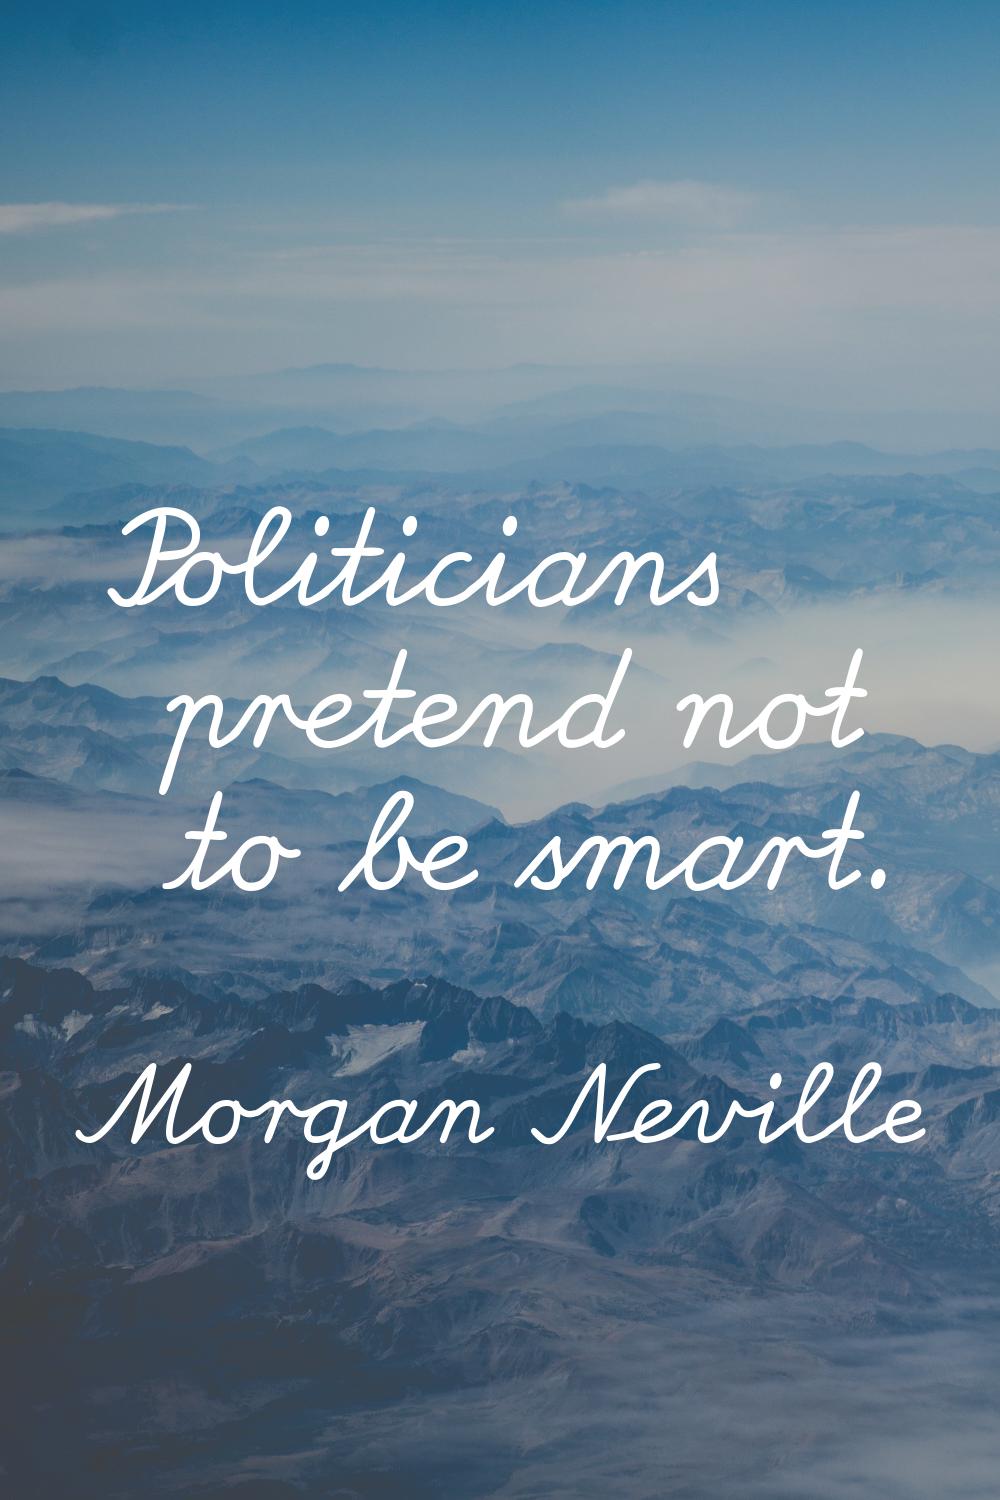 Politicians pretend not to be smart.